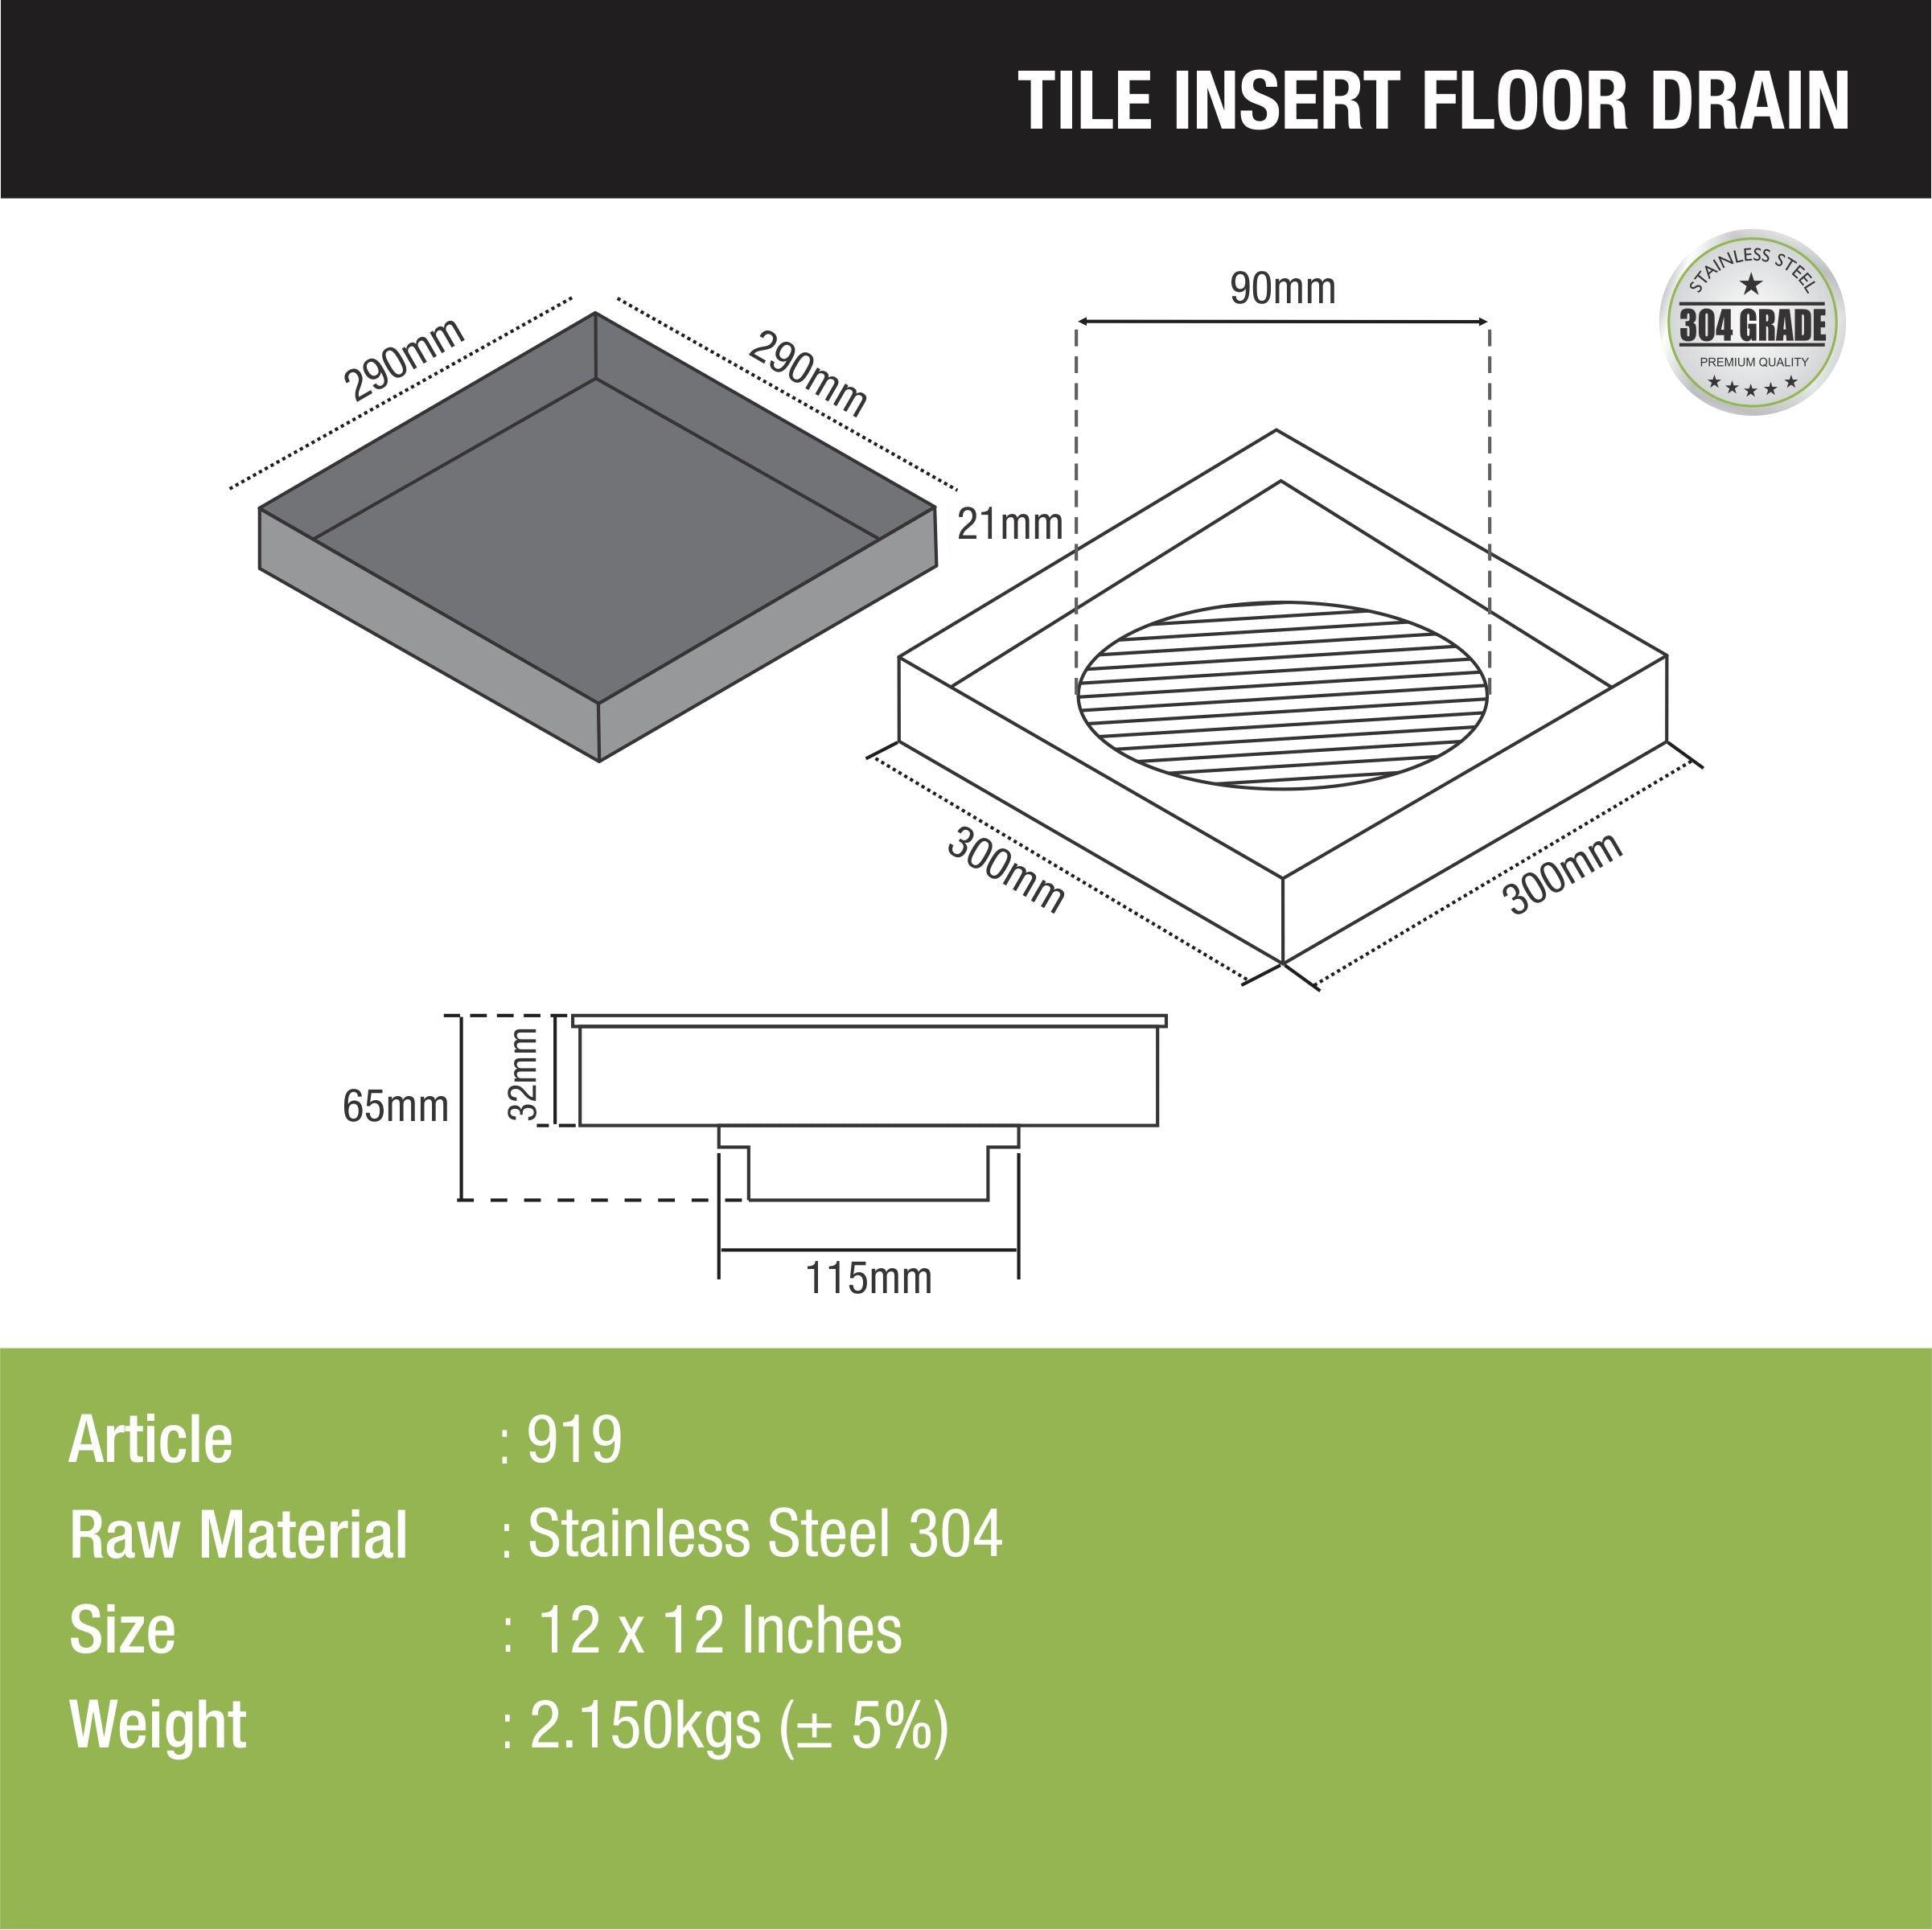 Tile Insert Floor Drain (12 x 12 Inches) sizes and dimensions